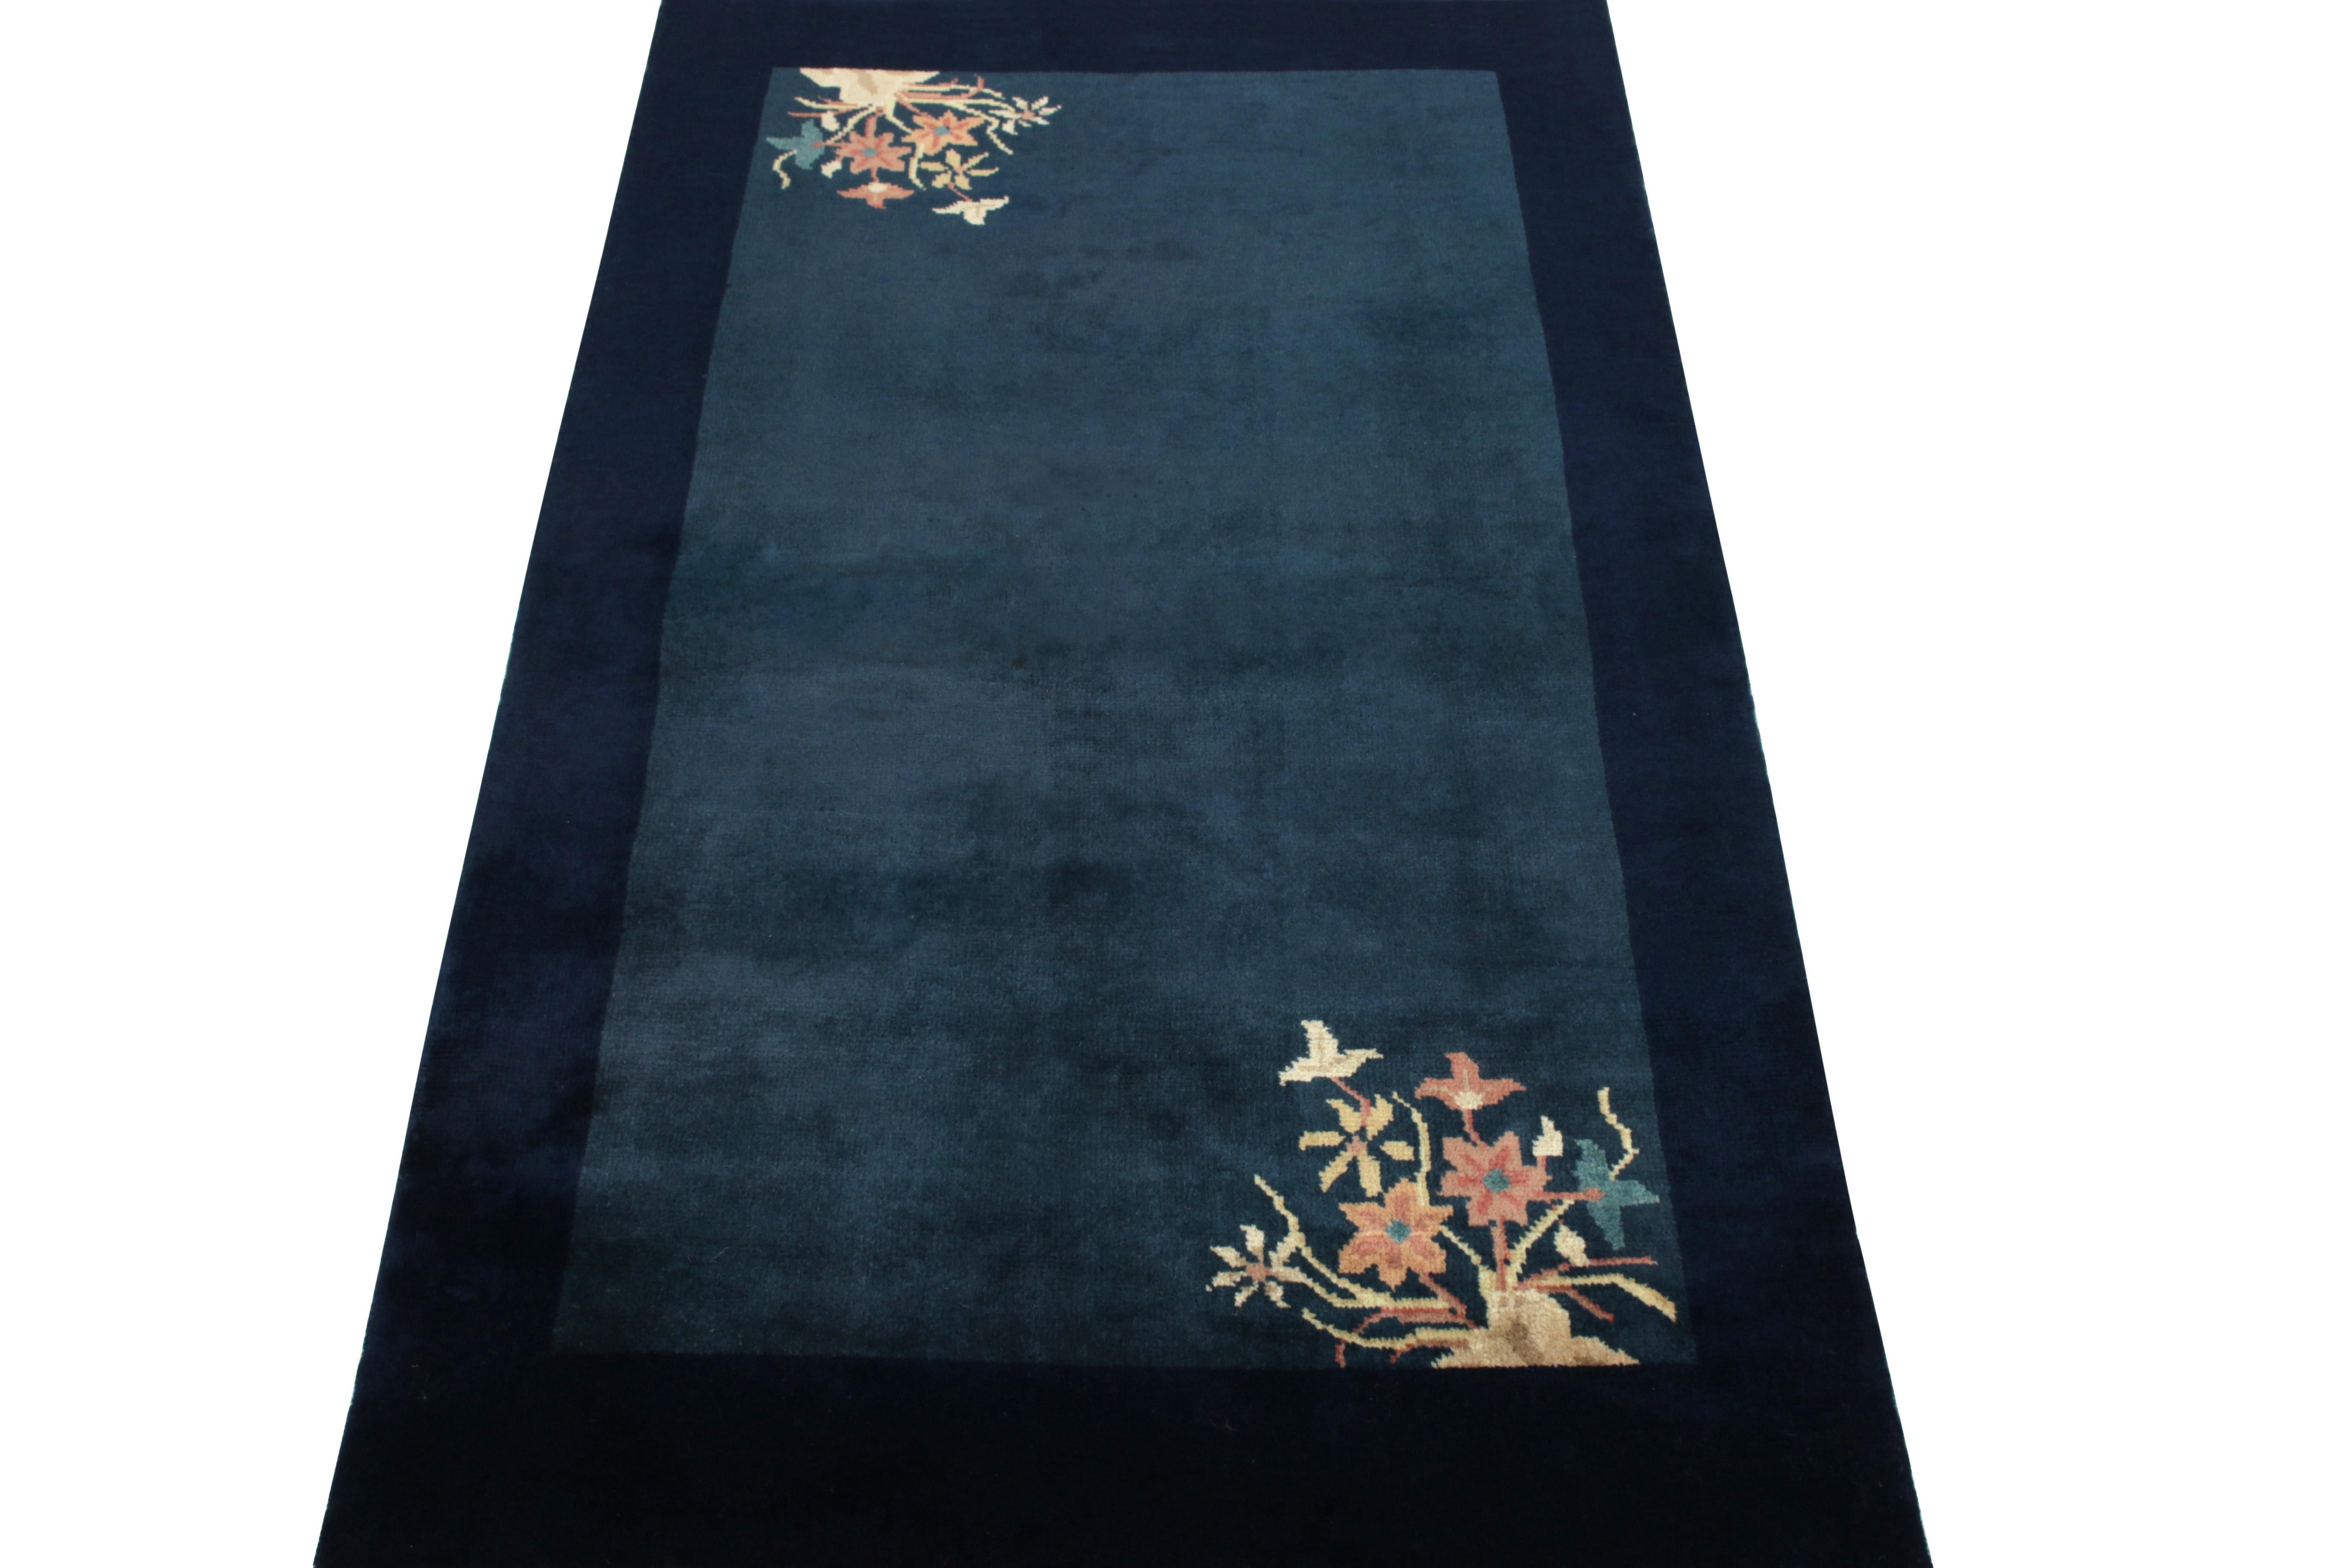 Inspired by the venerated 1920s style, this 3x3 vintage ode to Chinese art deco rugs features flowers flourishing in teal, tangerine-red, yellow tones in diagonal corners of the inner border highlighting the minimalist approach in design. Subtly